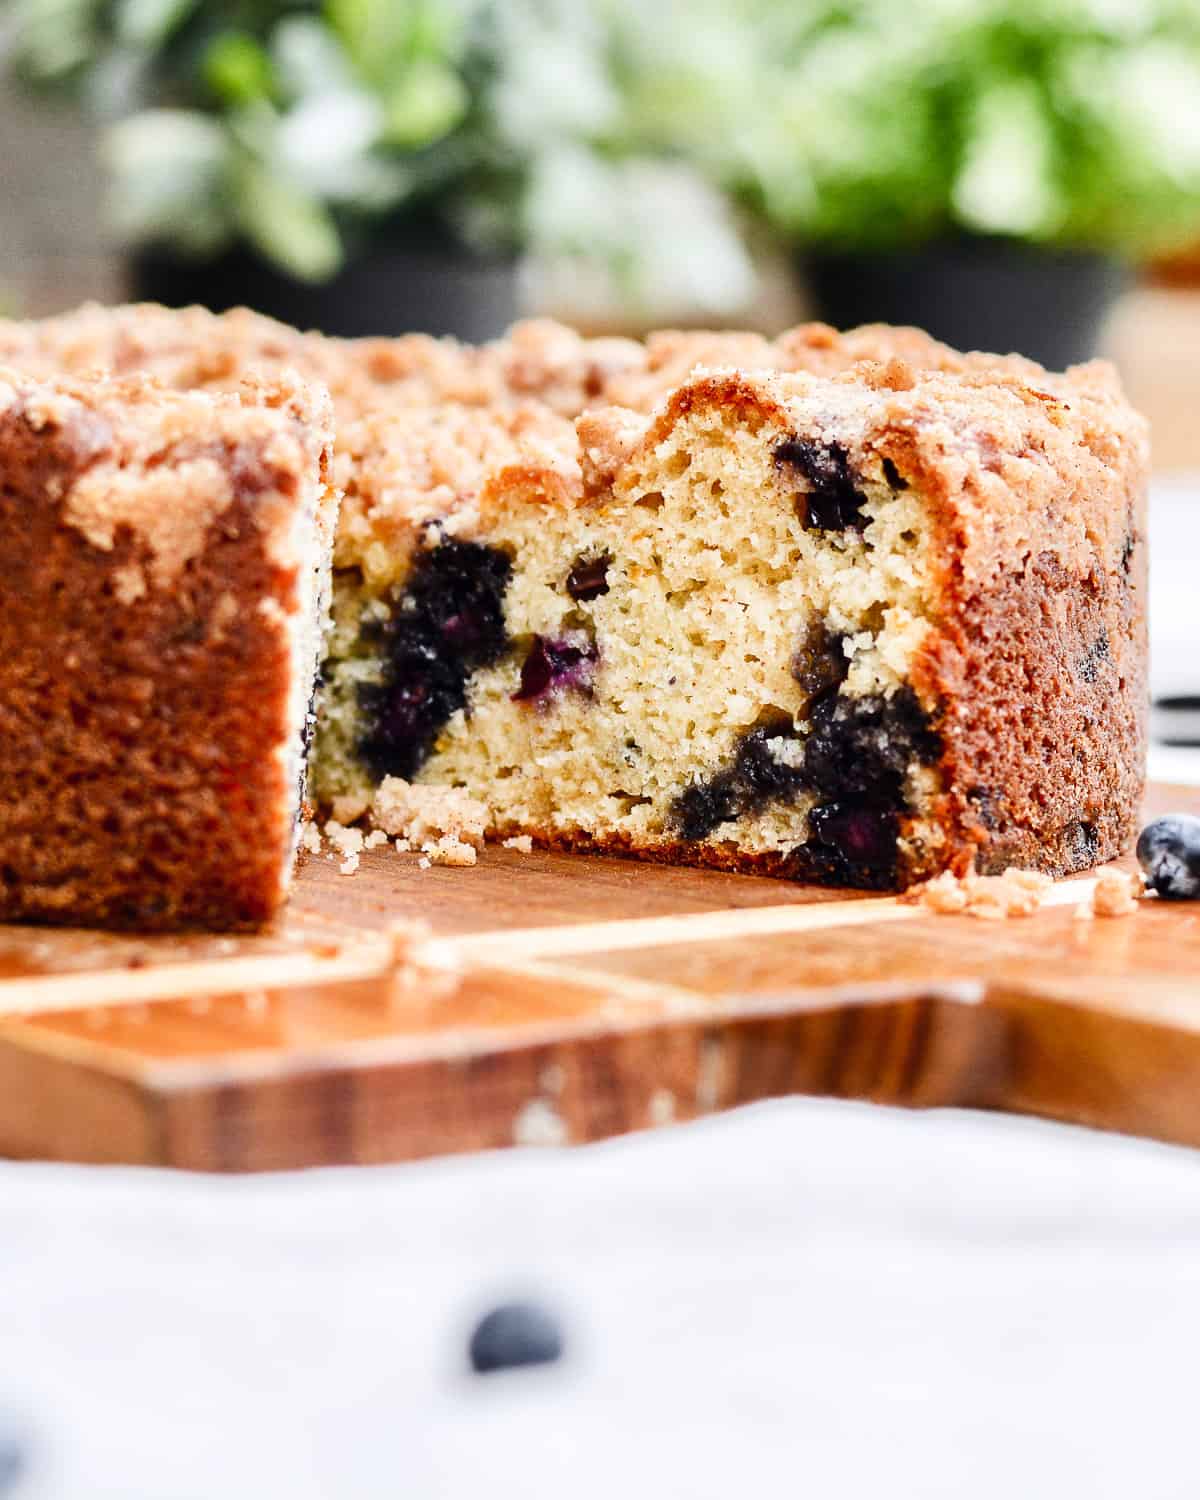 Blueberry cake sitting on cutting board with plants in background.